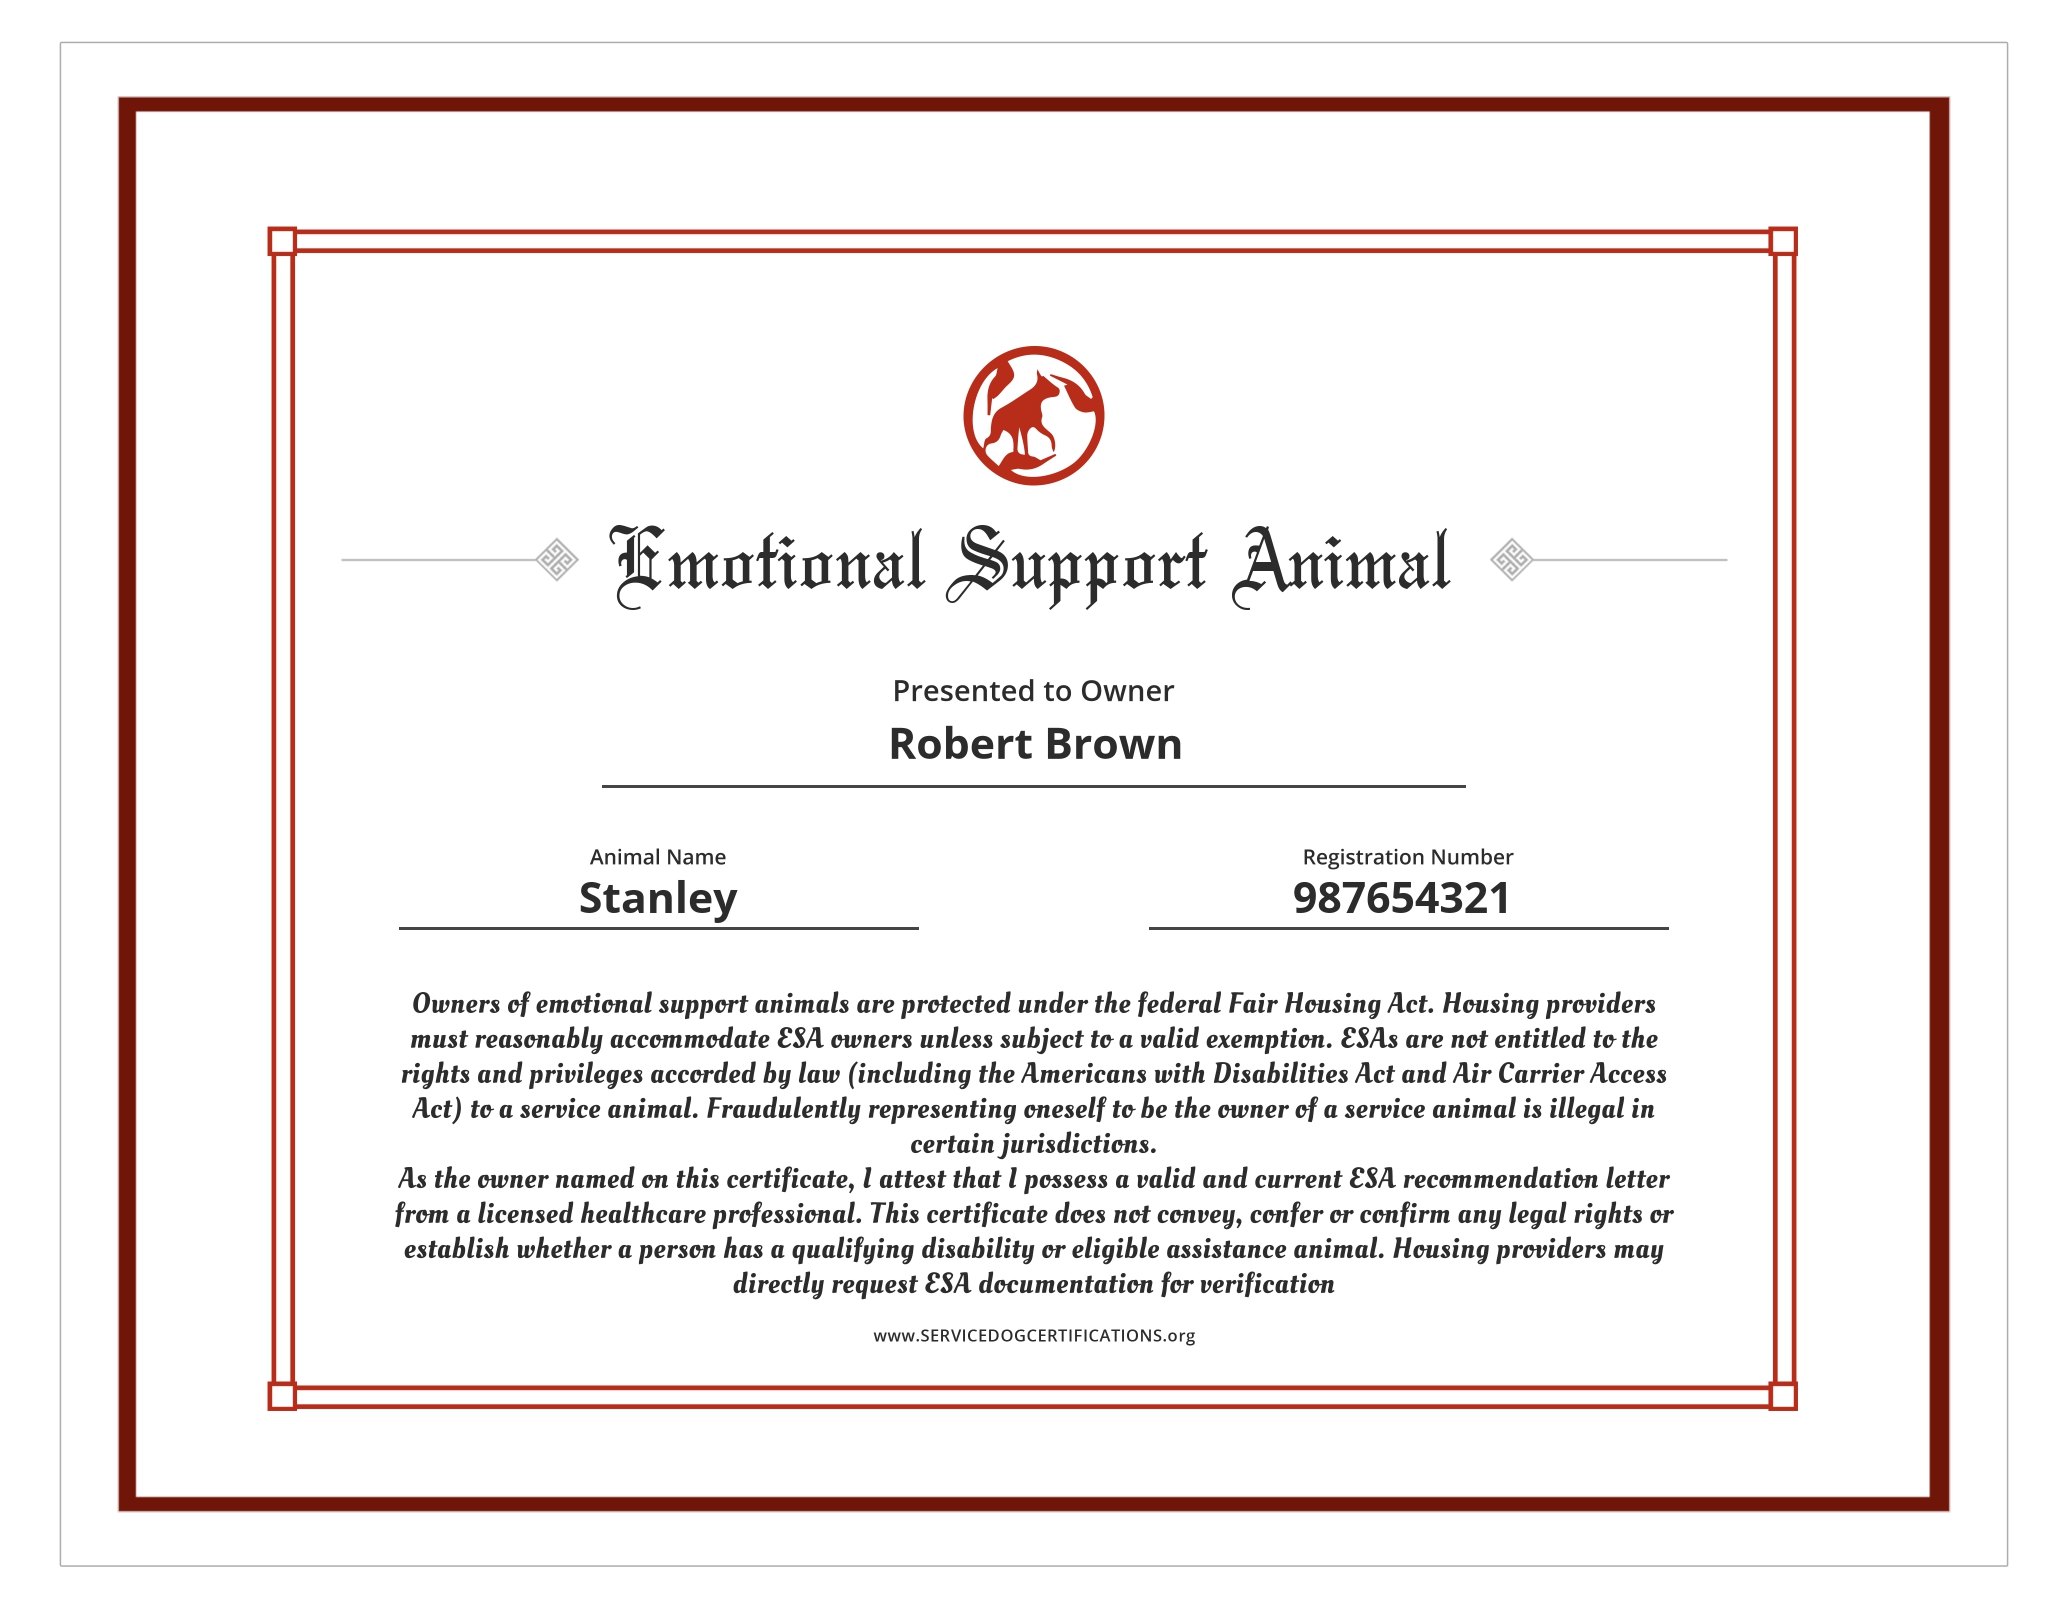 Emotional Support Animal ID - Service Dog Certifications